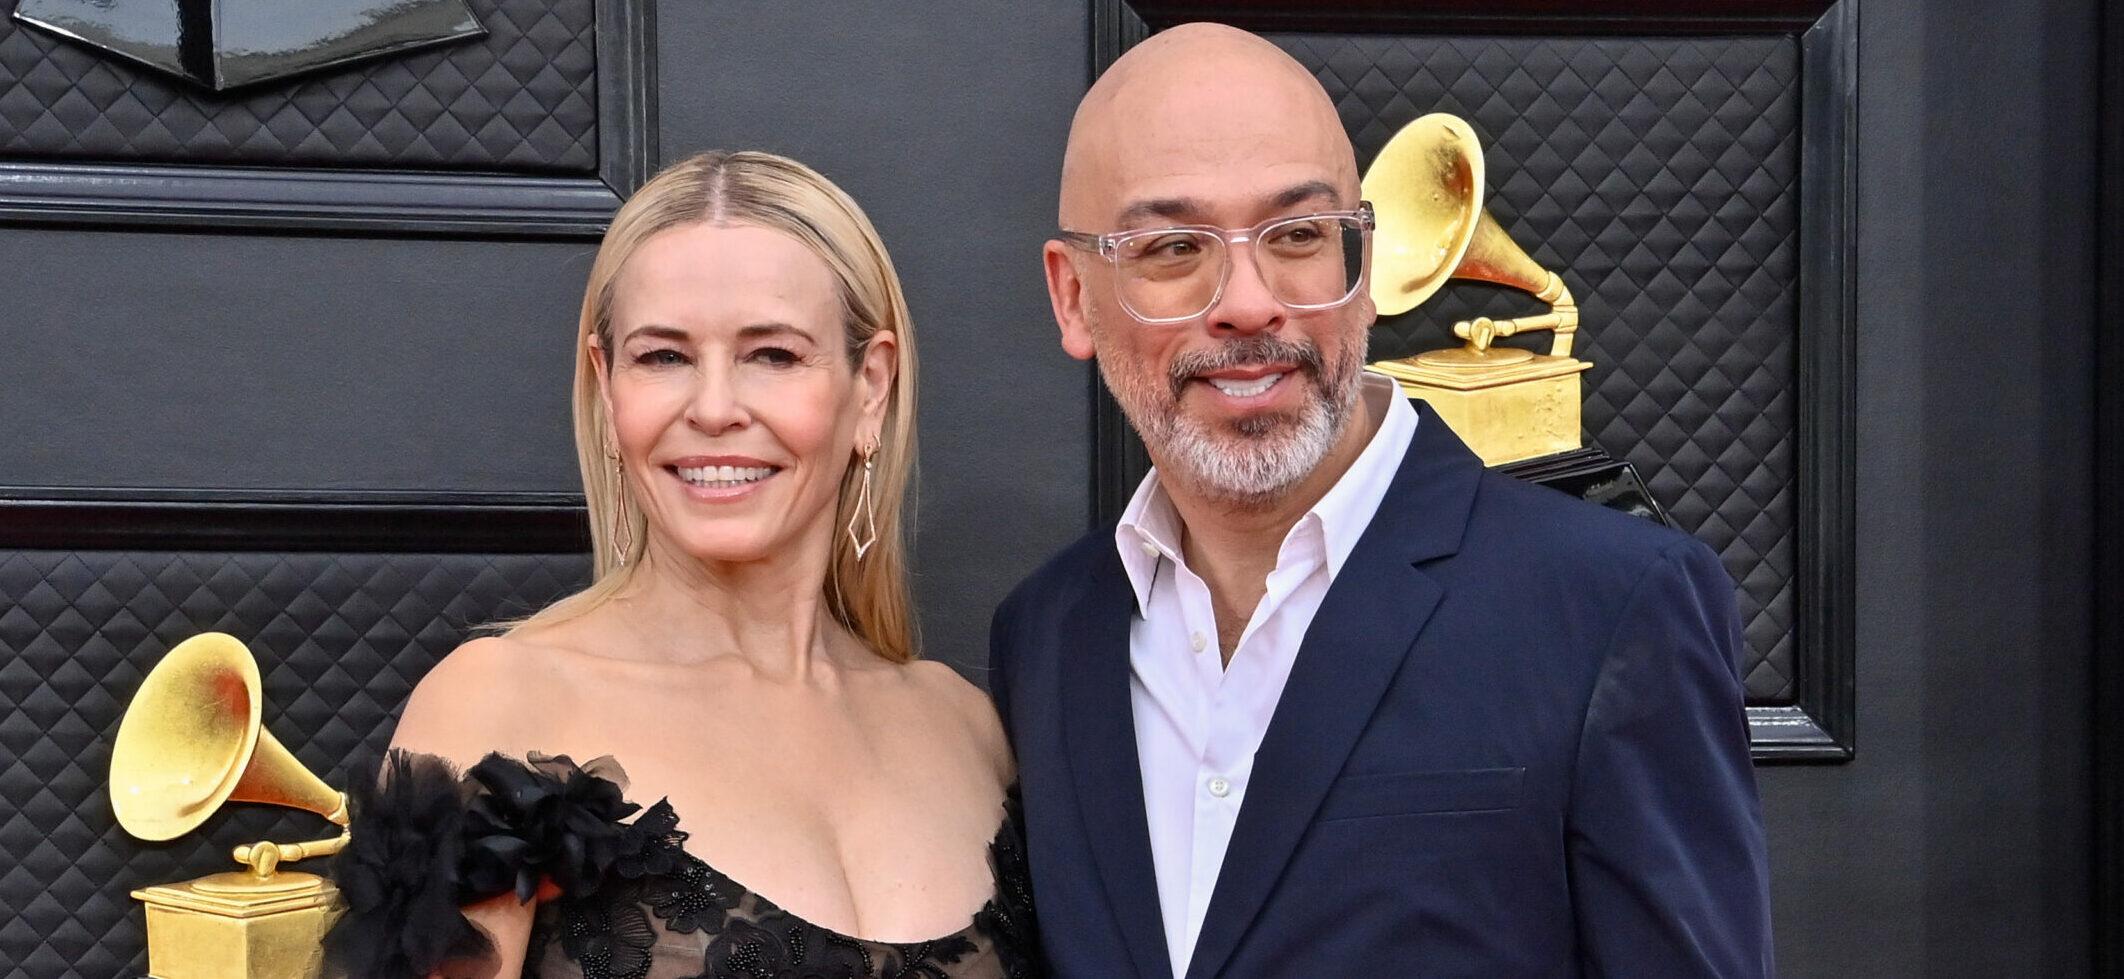 Chelsea Handler and Jo Koy arrive for the 64th annual Grammy Awards at the MGM Grand Garden Arena in Las Vegas, Nevada on Sunday, April 3, 2022.